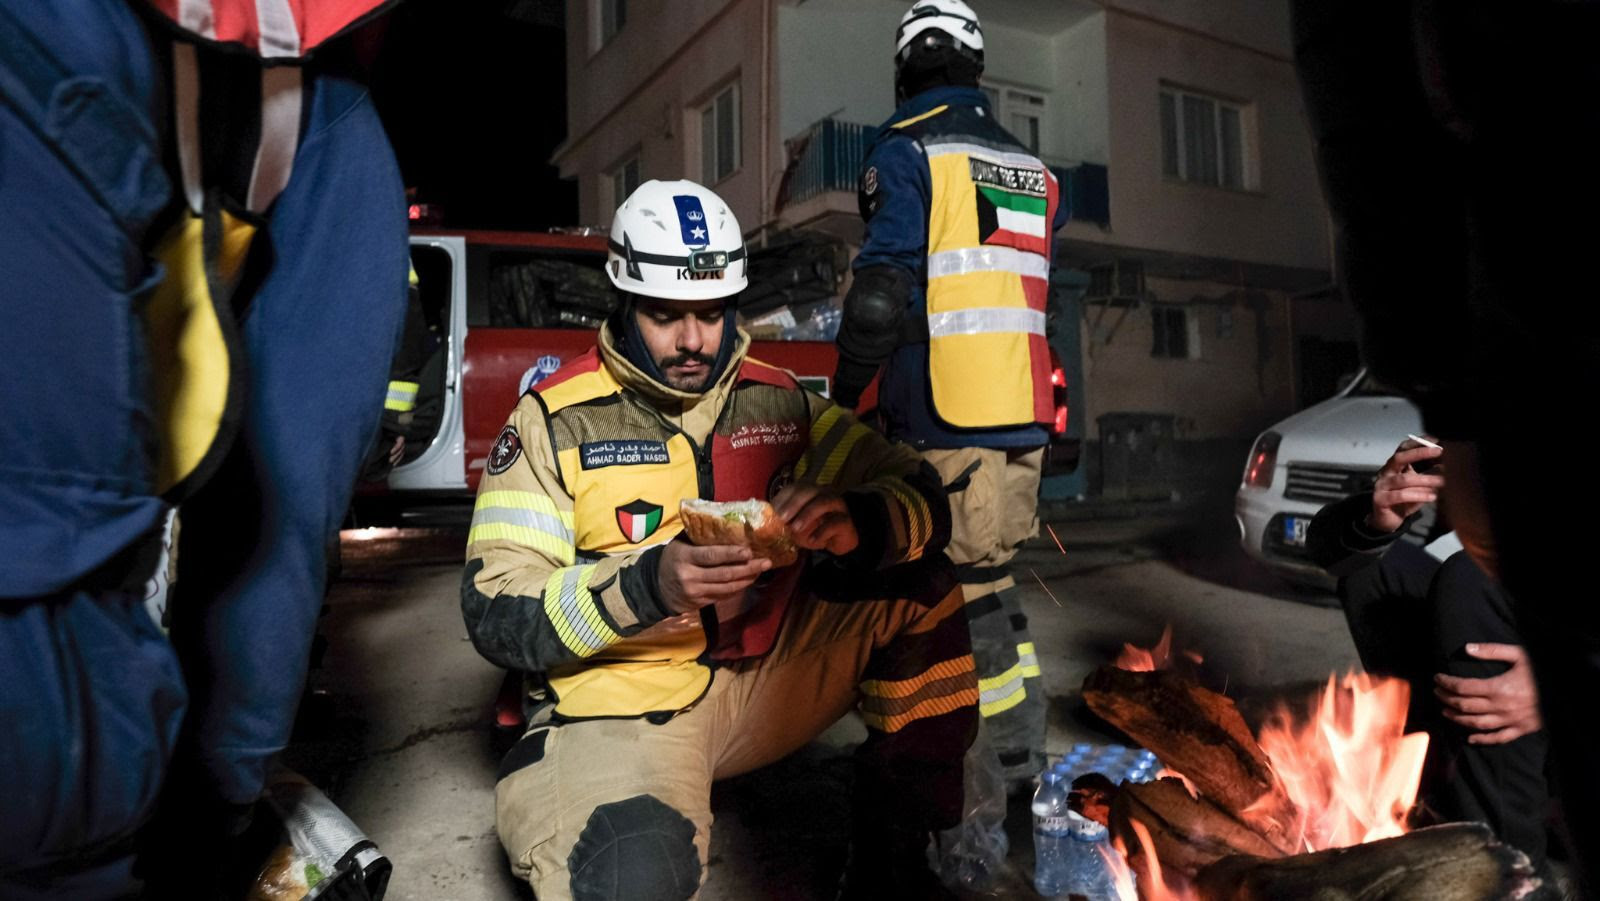 Emergency response worker eating a sandwich at night near a fire for warmth.